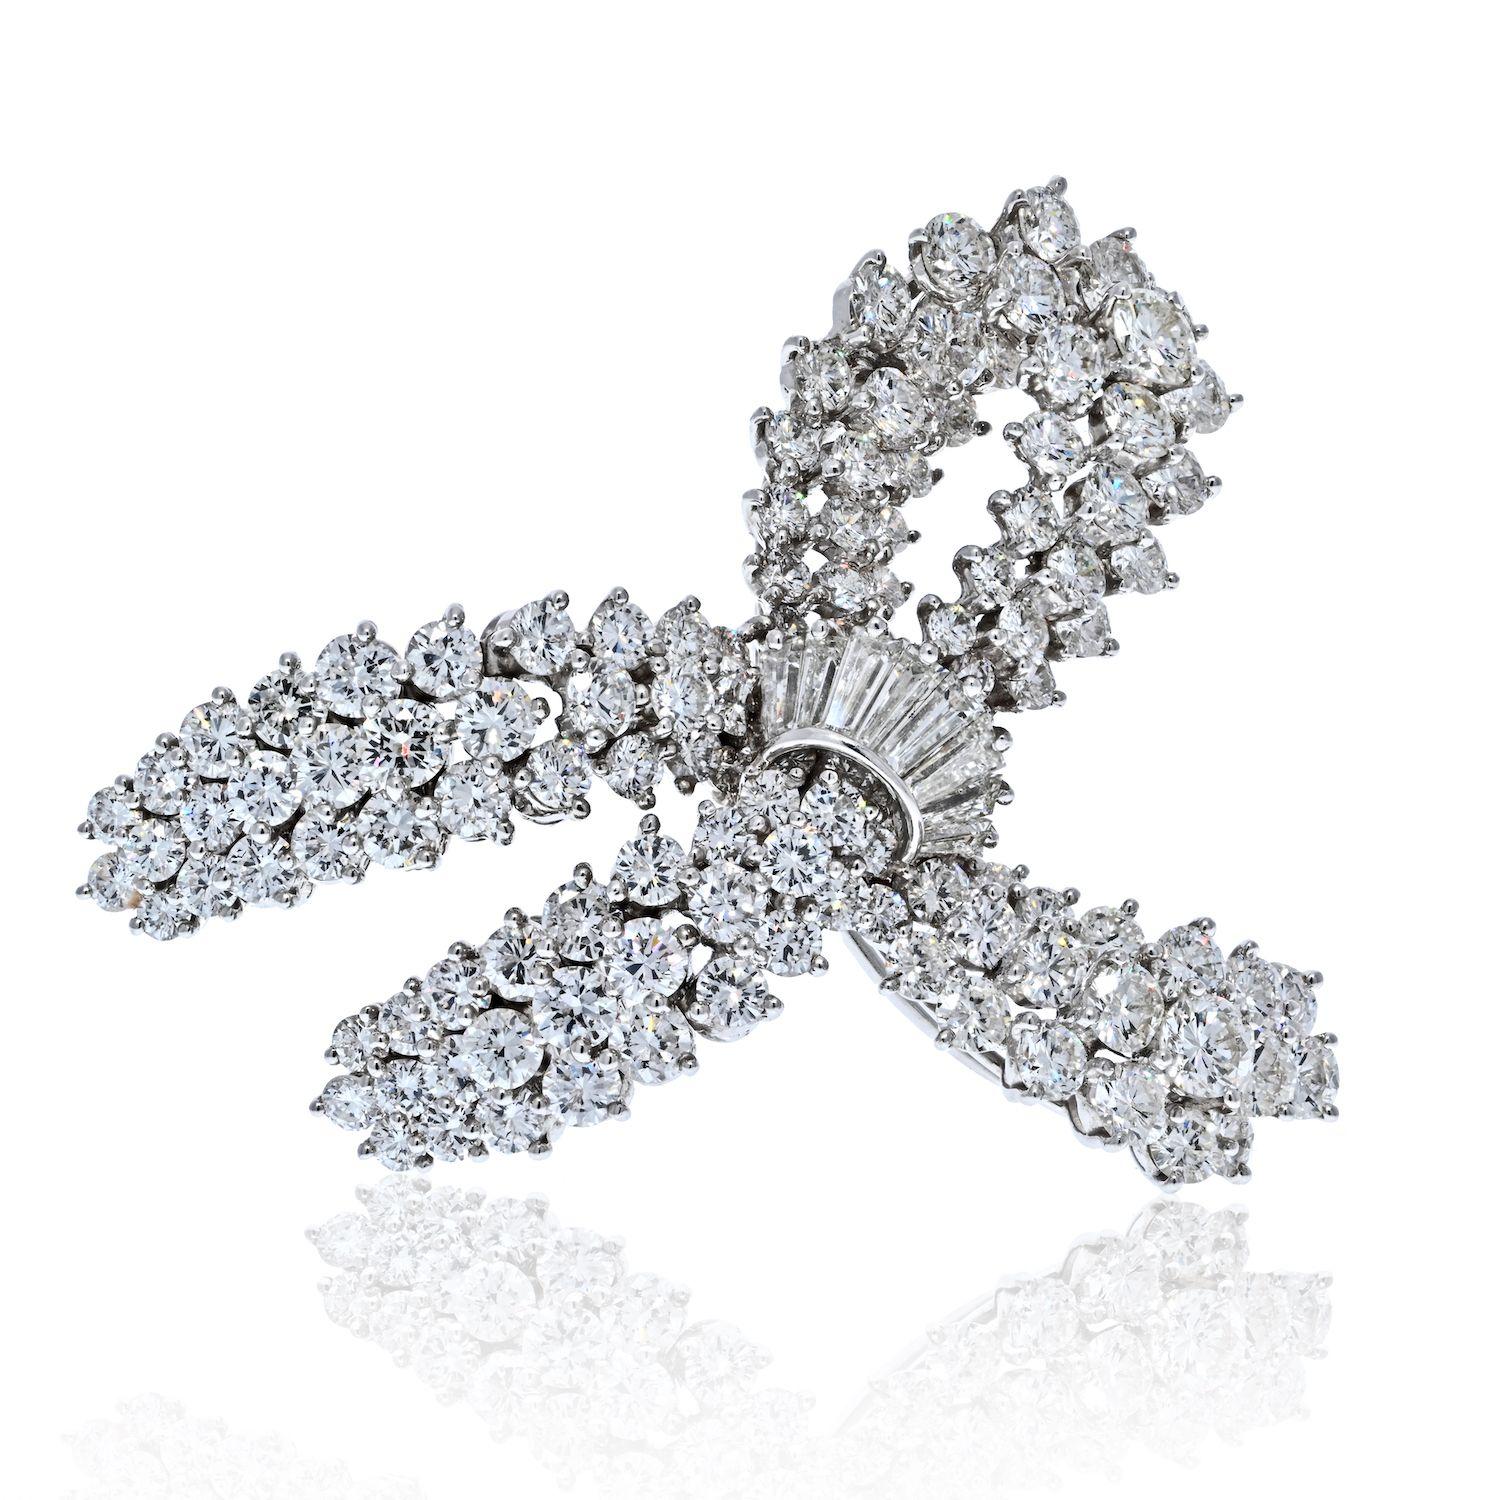 This is a lovely and lustrous diamond bow brooch mounted with round cut diamonds and baguette-cuts of F-G color, VS1-VS2 clarity. Estimated carat weight 10.00cts. This brilliant and gleaming brooch measures about 1.5 inches wide and makes a perfect